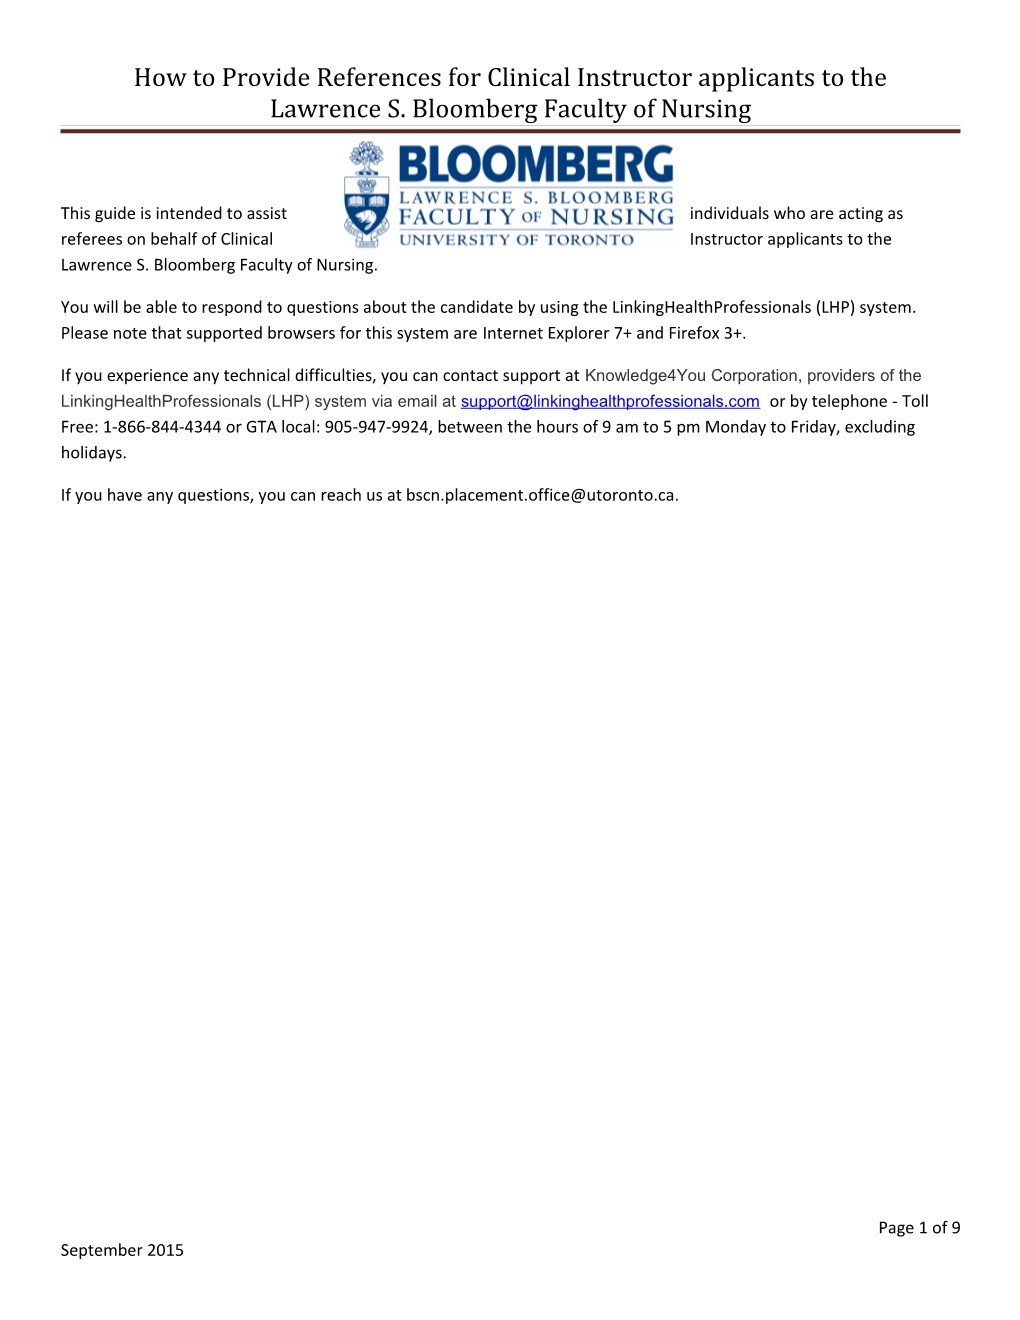 How to Provide References for Clinical Instructor Applicants to the Lawrence S. Bloomberg